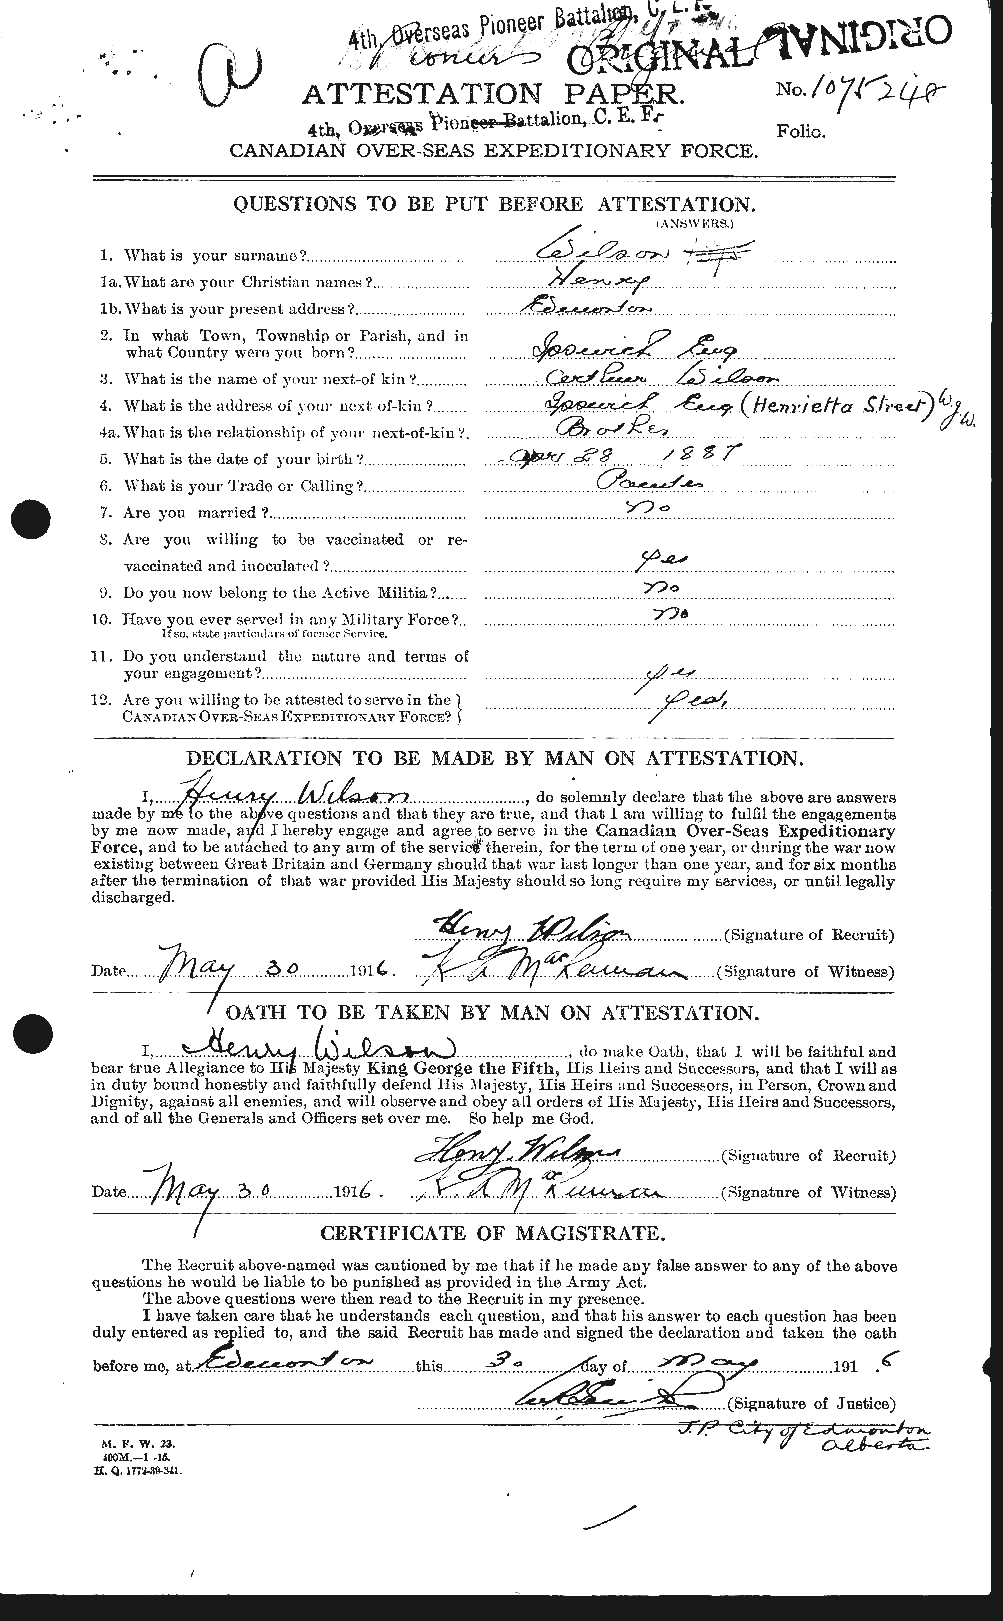 Personnel Records of the First World War - CEF 679500a